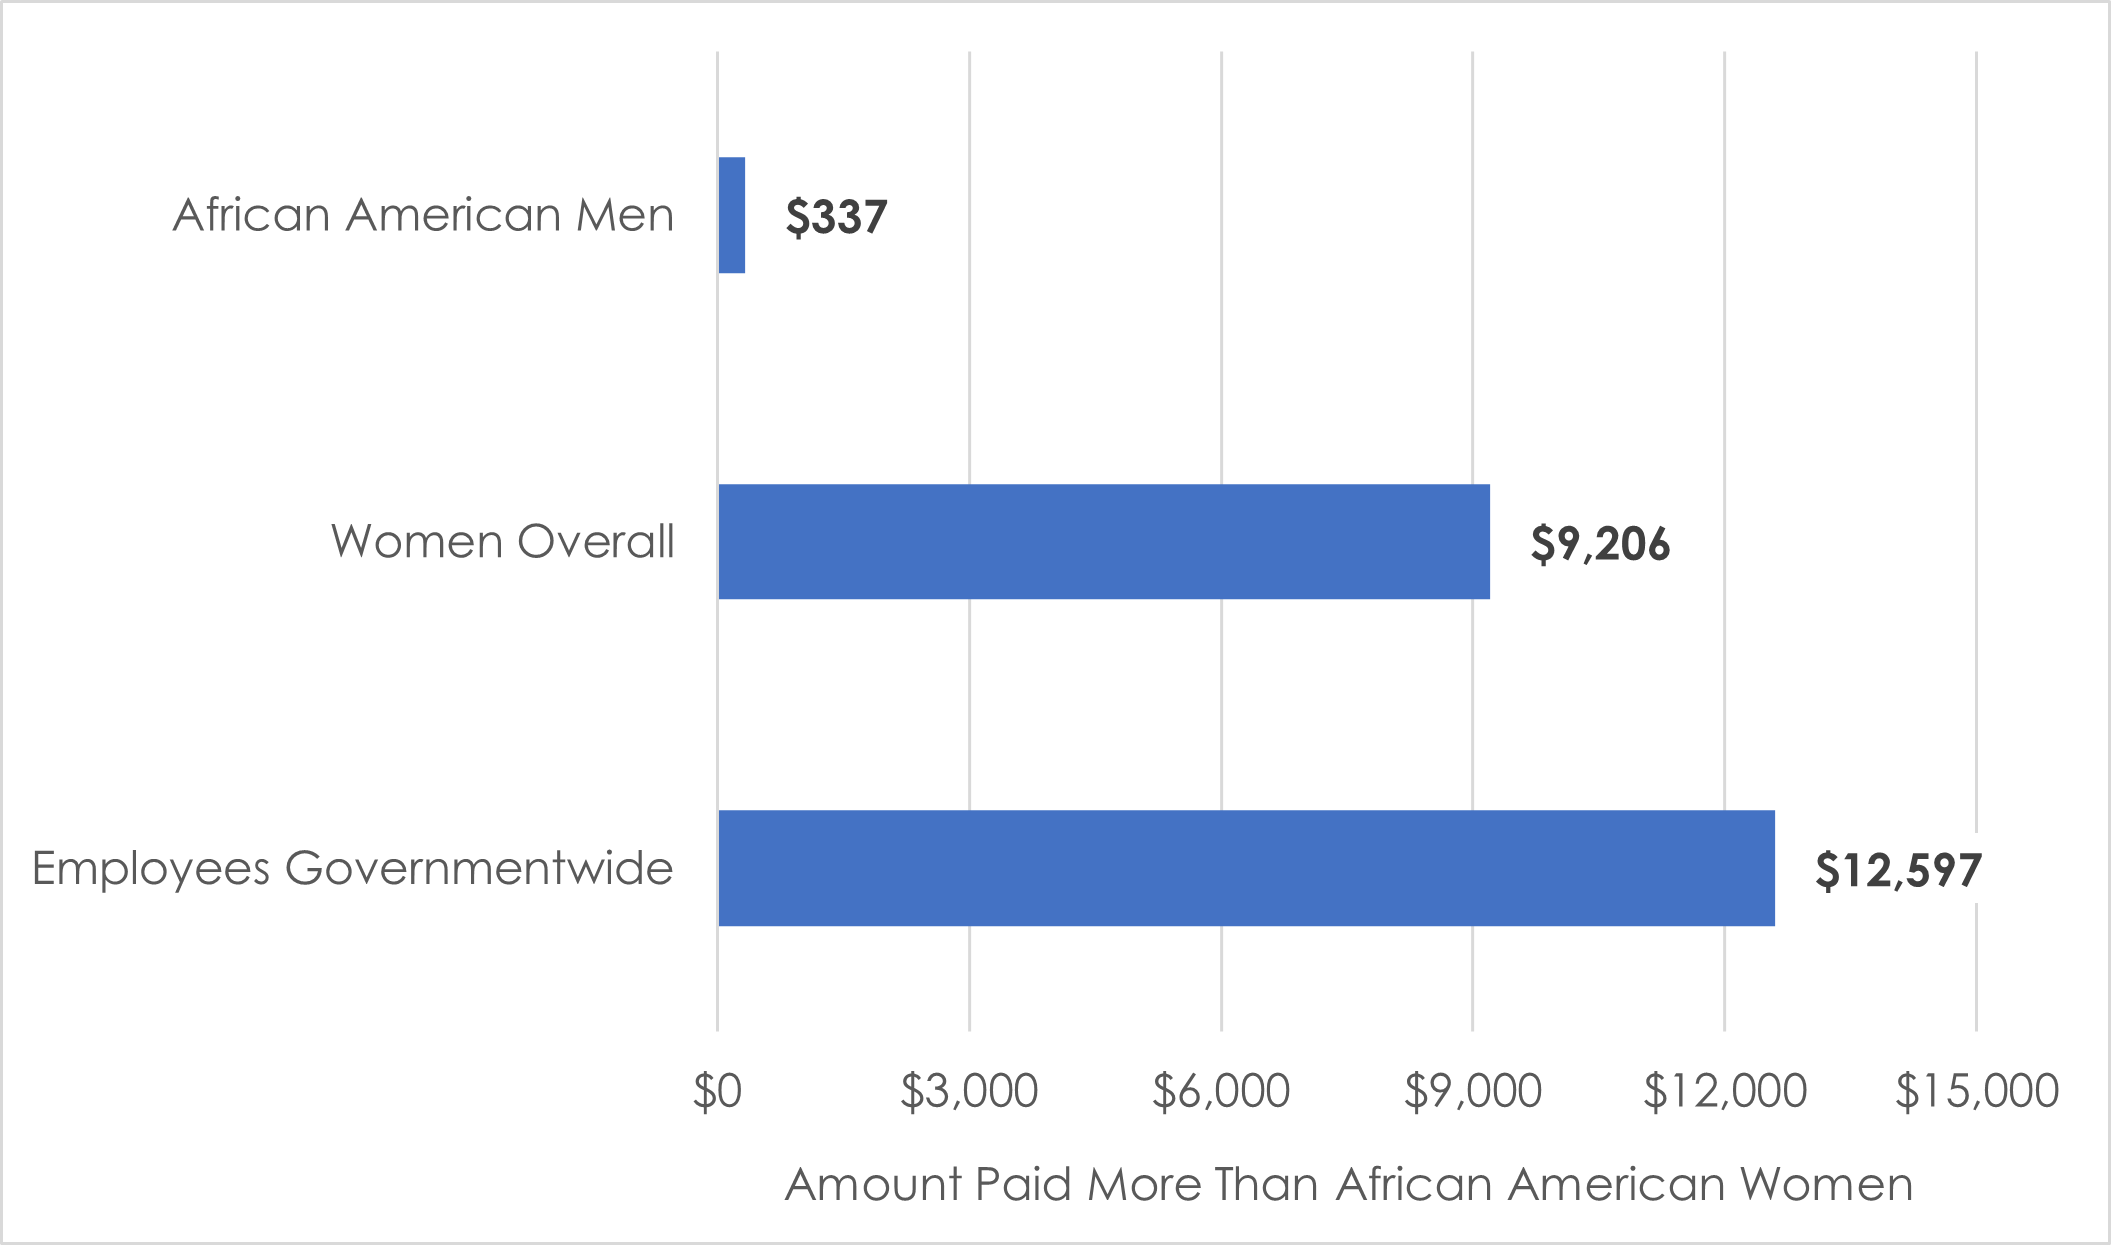 African-American Men are paid $337 more than African-American Women in the Federal sector.  Women are paid $9,206 more than African-American Women in the Federal sector.  Employees governmentwide are paid $12,587 more than African-American Women in the Federal sector.